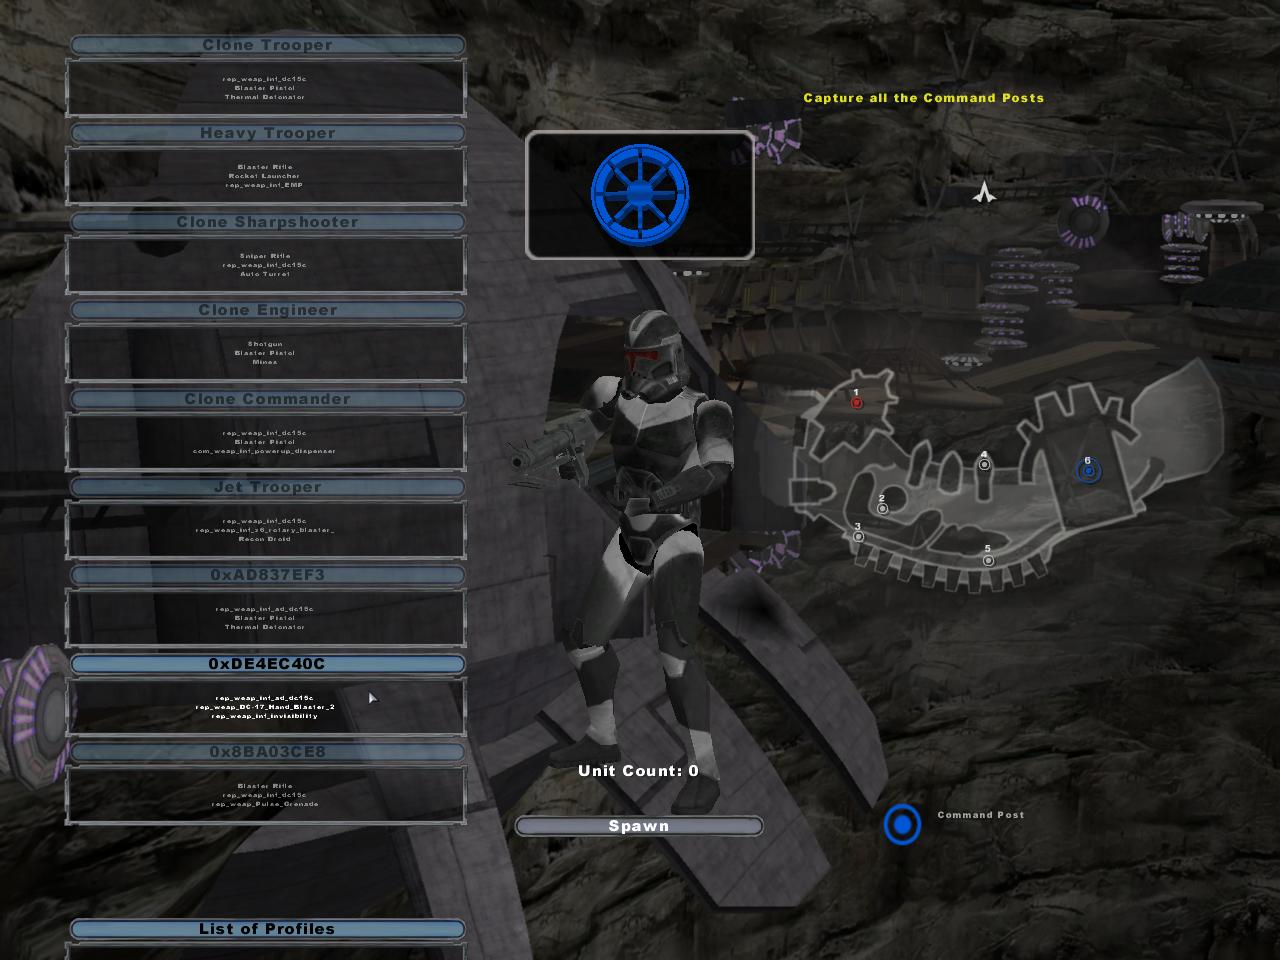 how to use jetpack in star wars battlefront